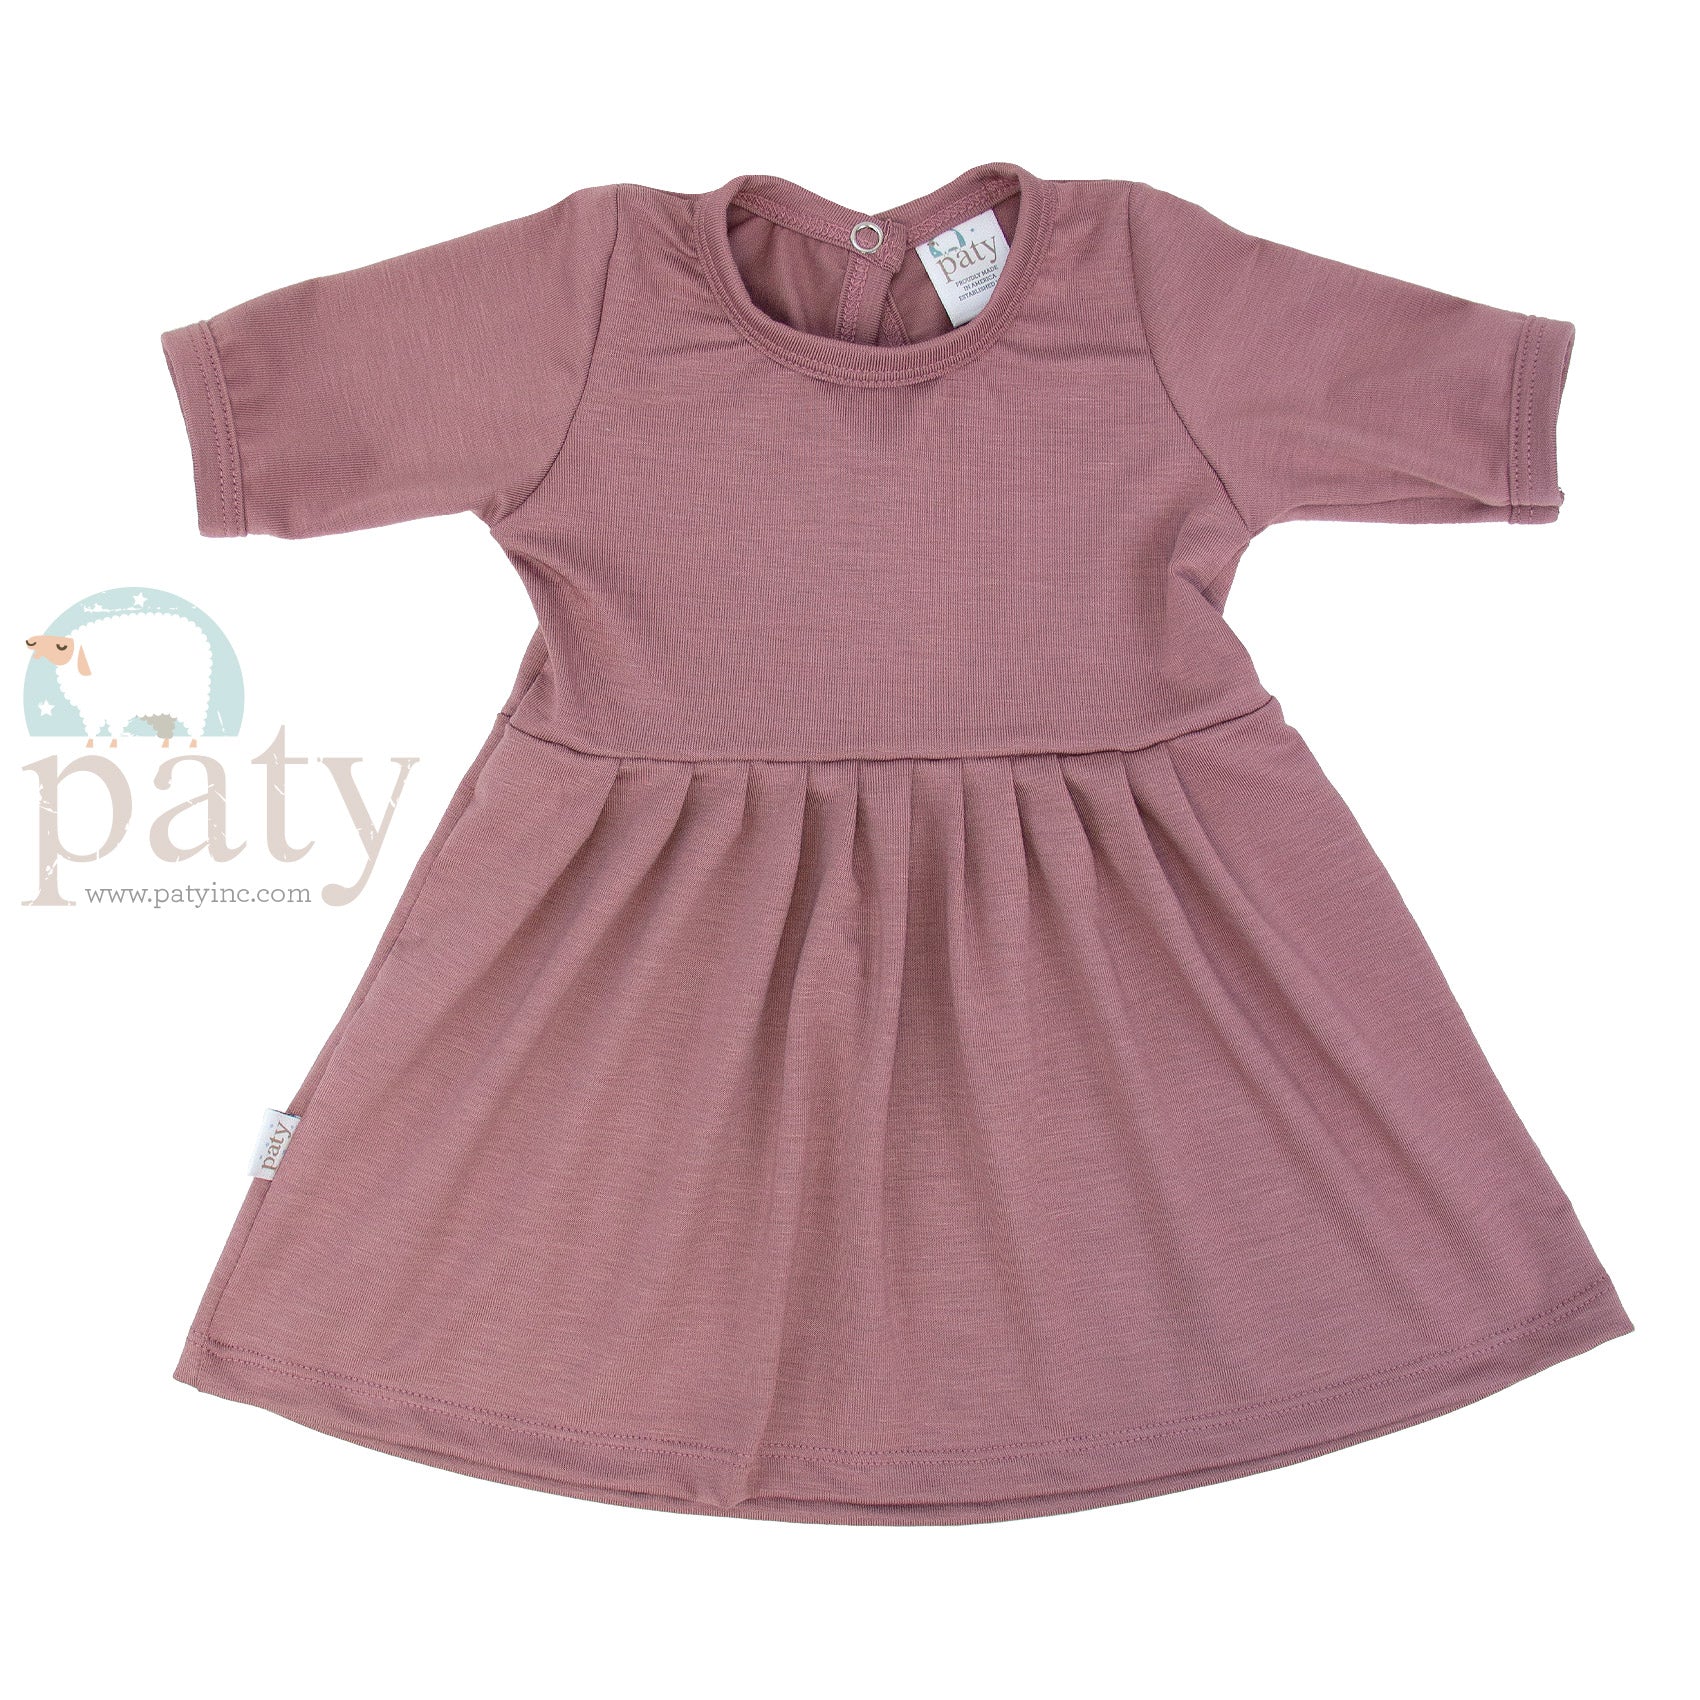 A baby girl's Paty Bamboo Dress with a collared neckline.